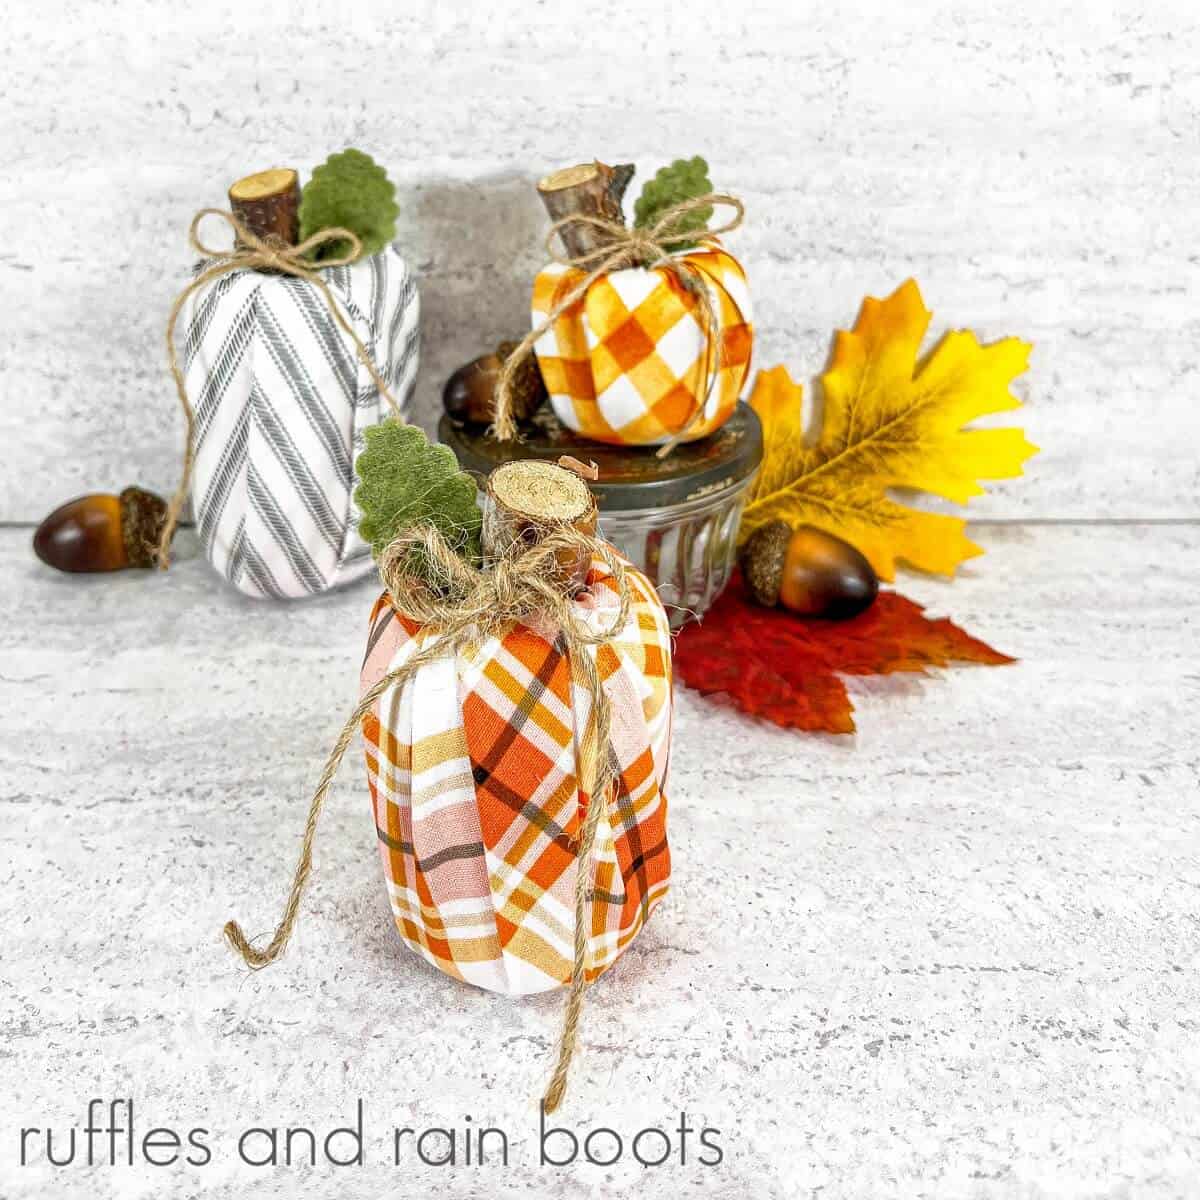 Three wrapped Dollar Store pool noodle pumpkins, one in black and white, one orange and white and one orange plaid, next to faux fall leaves acorns and a small glass jar with a galvanized metal lid on a white and grey background.